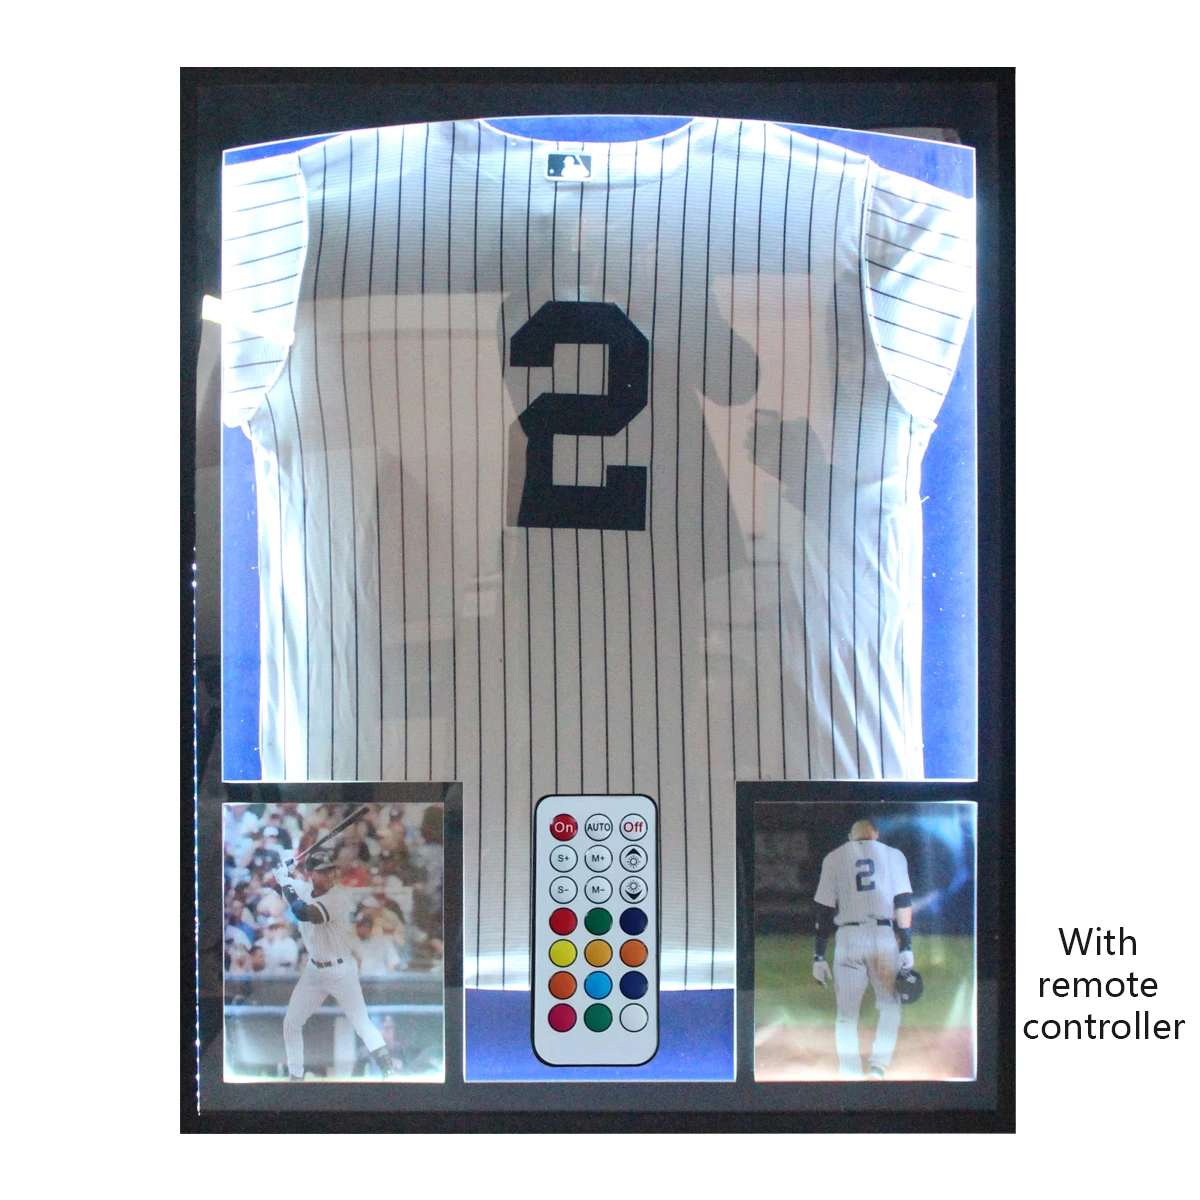 Sports Display, Jersey display cases